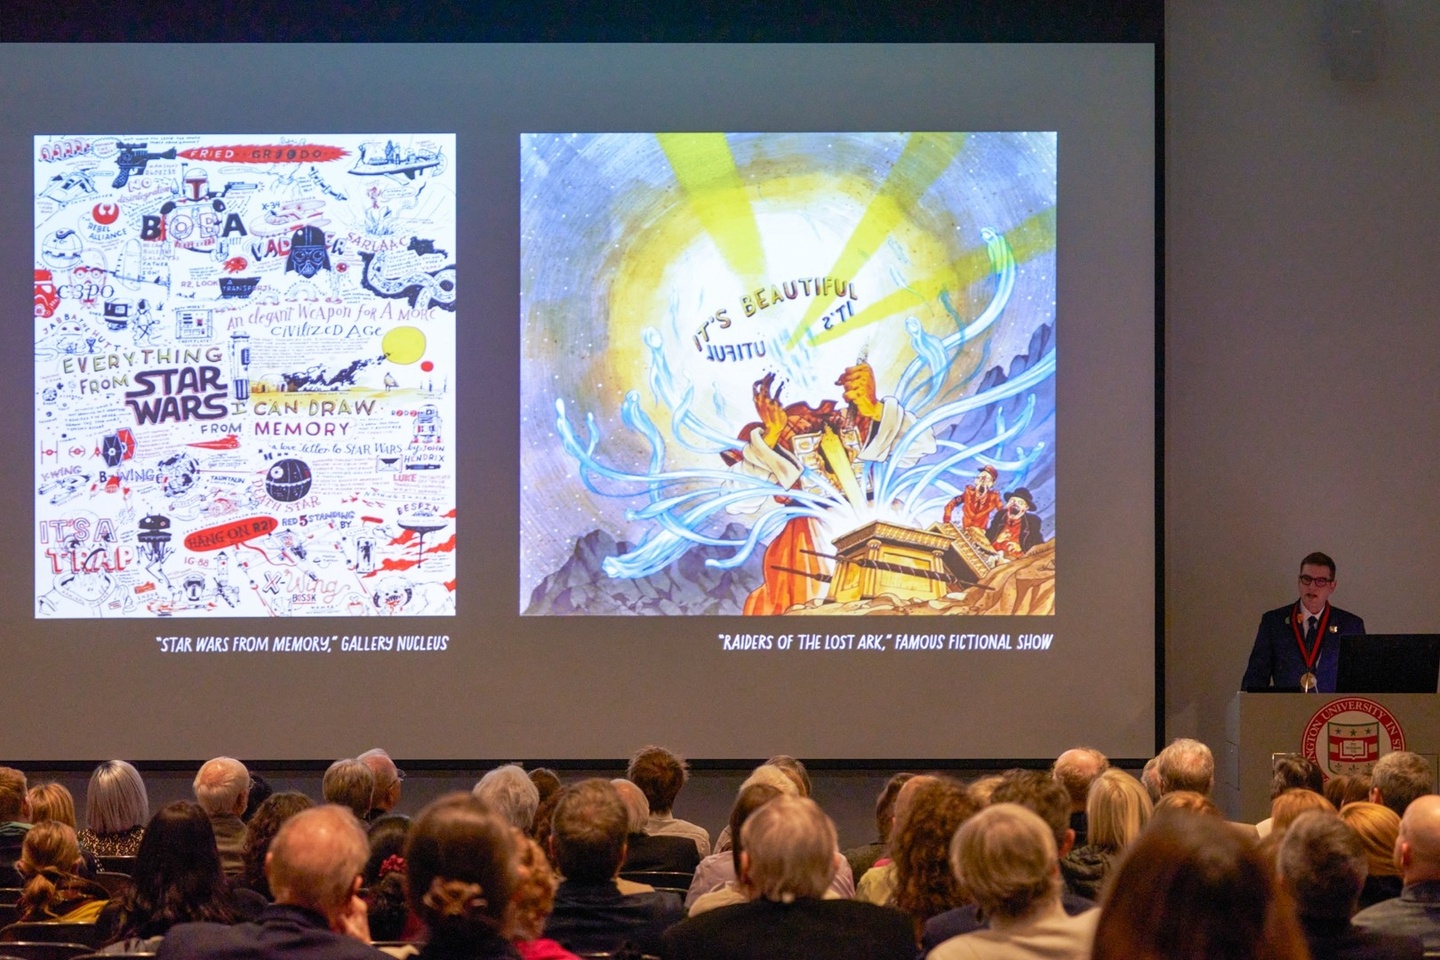 Auditorium of people with professor at front delivering lecture and two images on projection screen of illustrations.